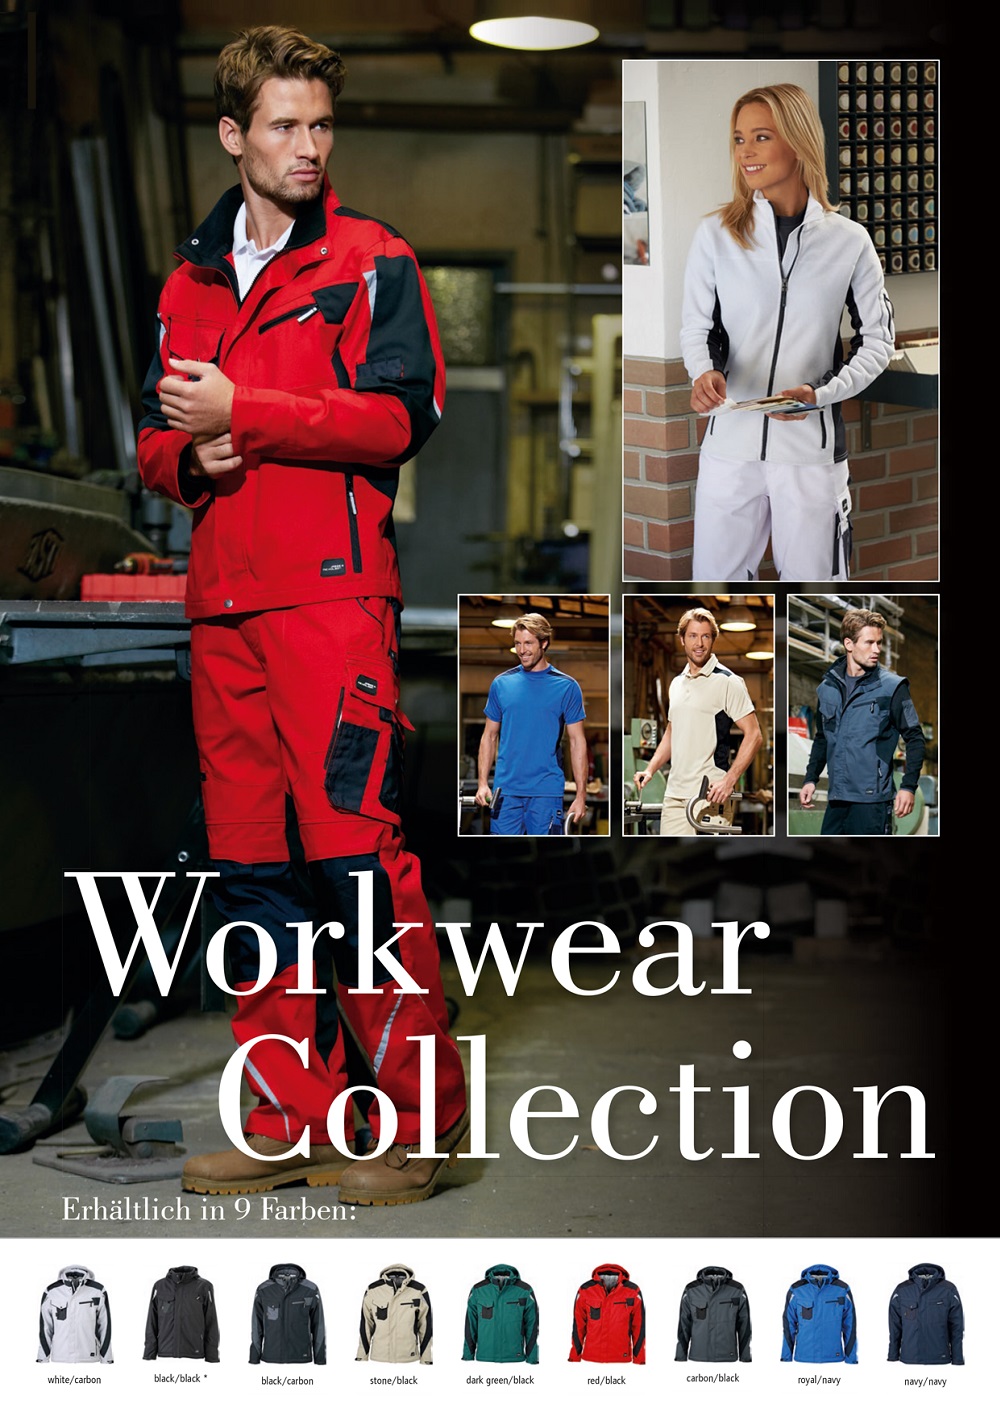 workwear collection 2018 logo